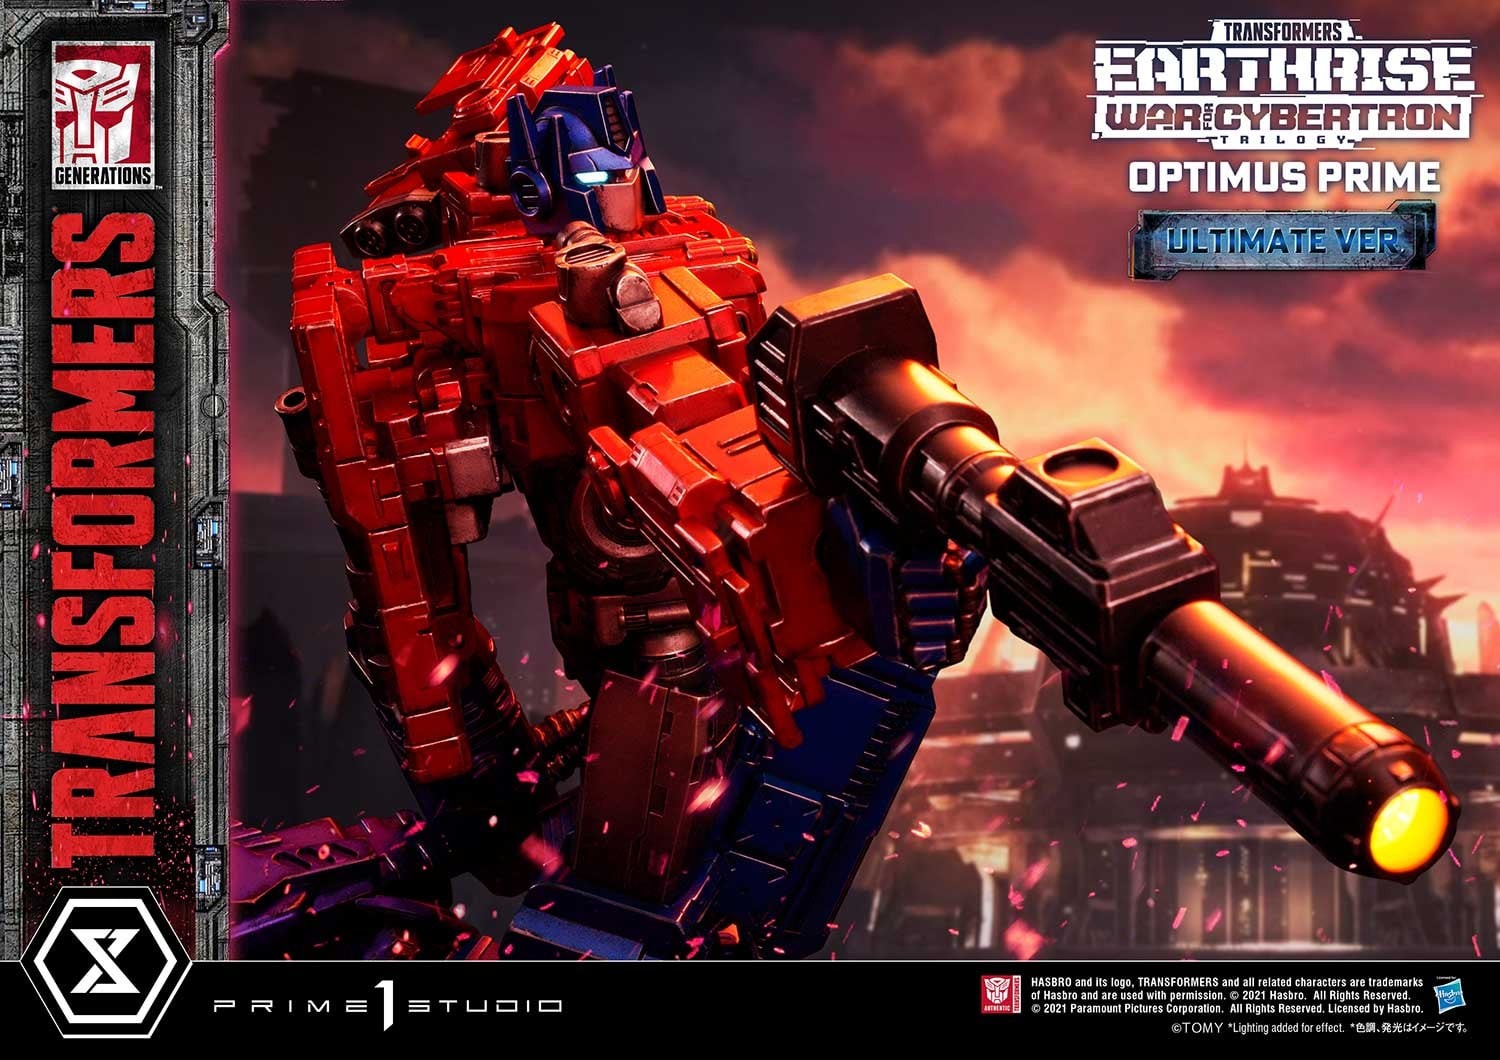 The WFC Optimus and Megatron Statues Most Mocked by Fans Have Been